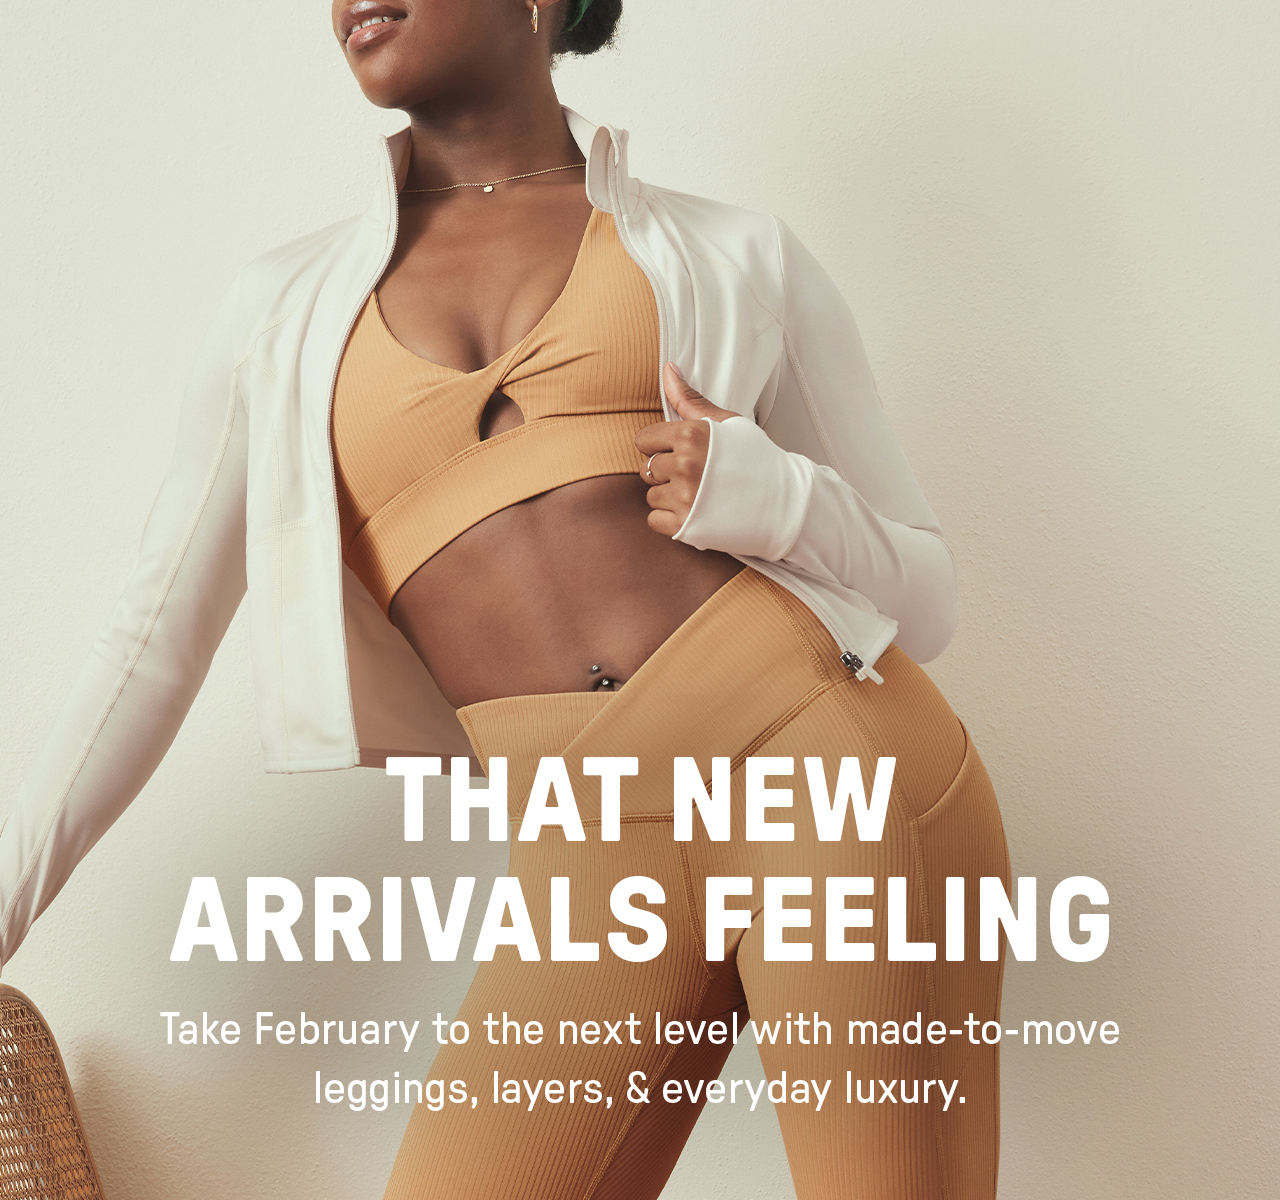 Did Fabletics Continue to Charge You After Canceling VIP Membership? - Top  Class Actions